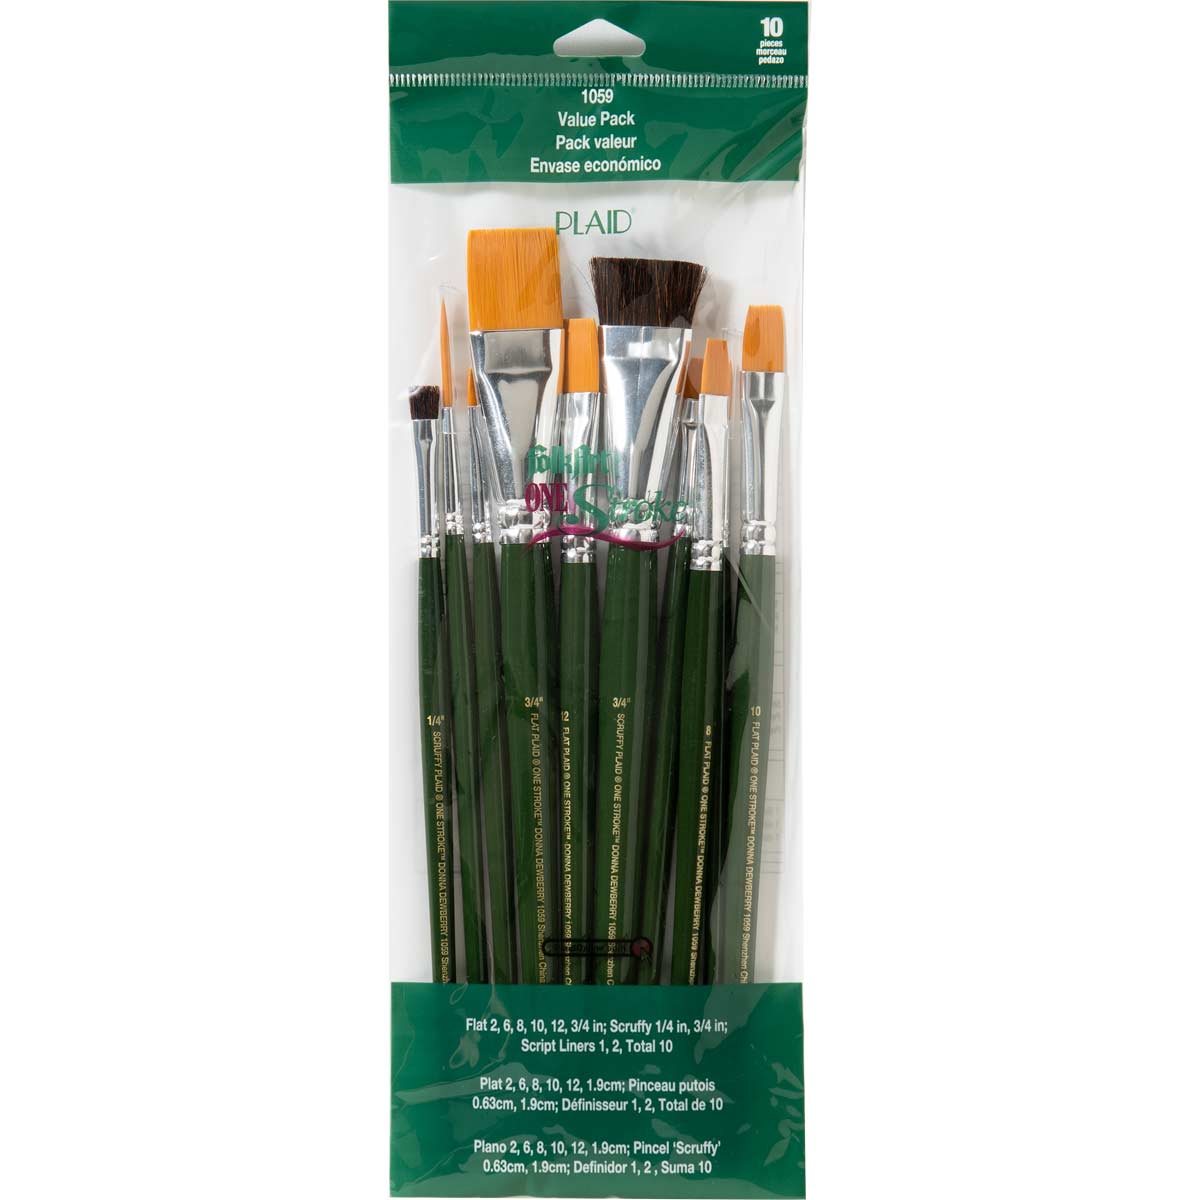 3 Flat P S 3 Painters Select Round Brushes Donna Dewberry Scruffy Brushes 4 